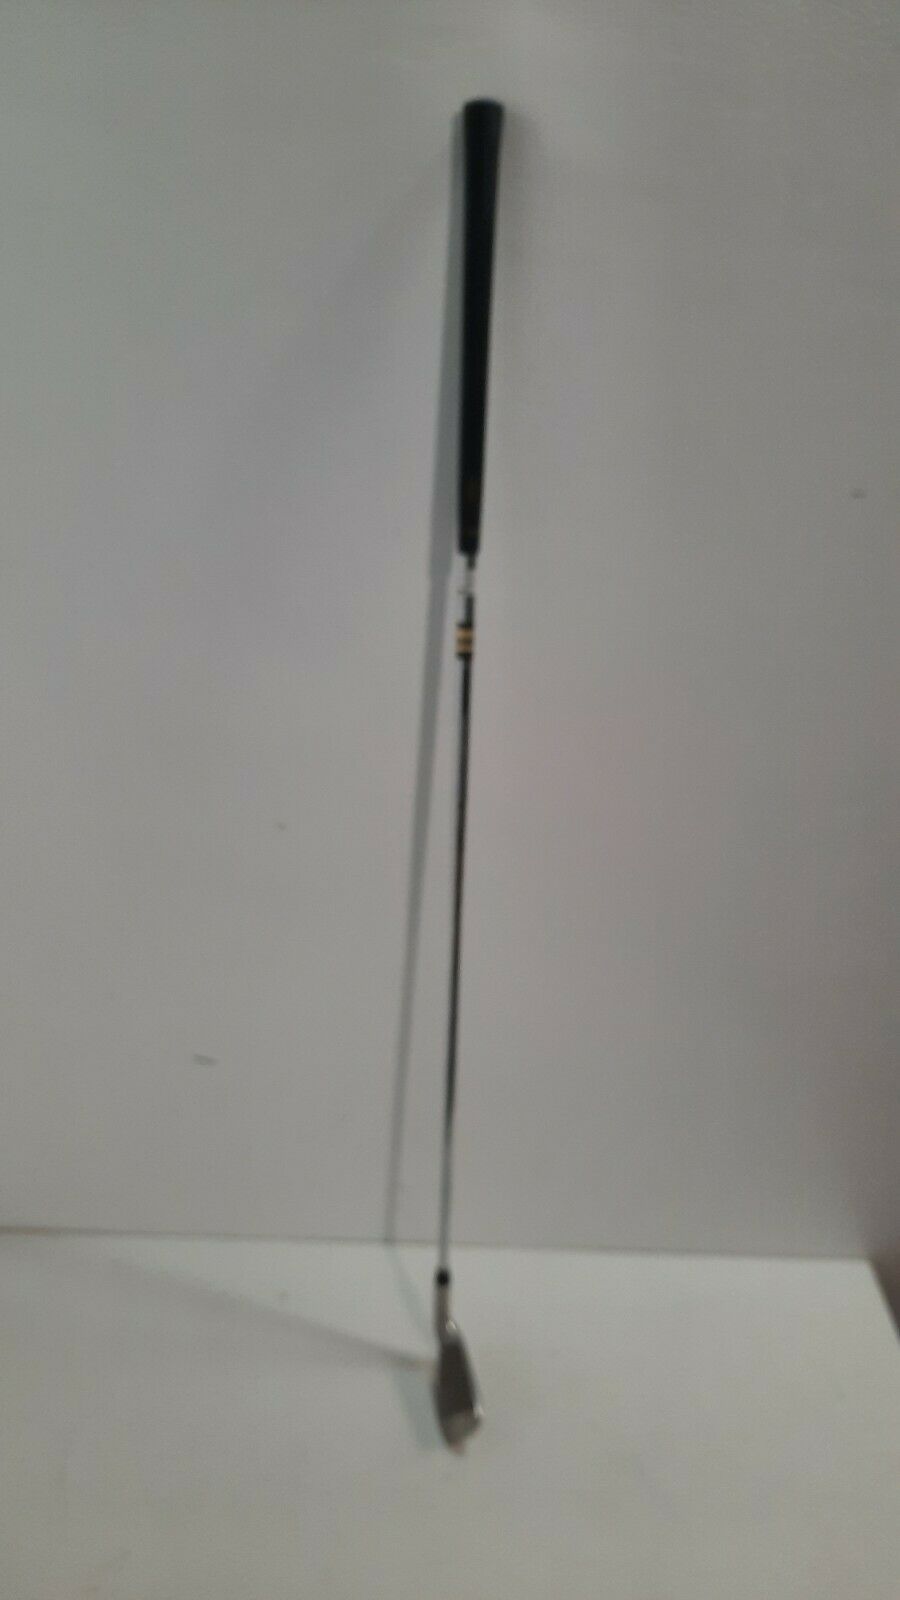 Uskg 6 Iron Golf Club Size 36 In Left Hand Clearance